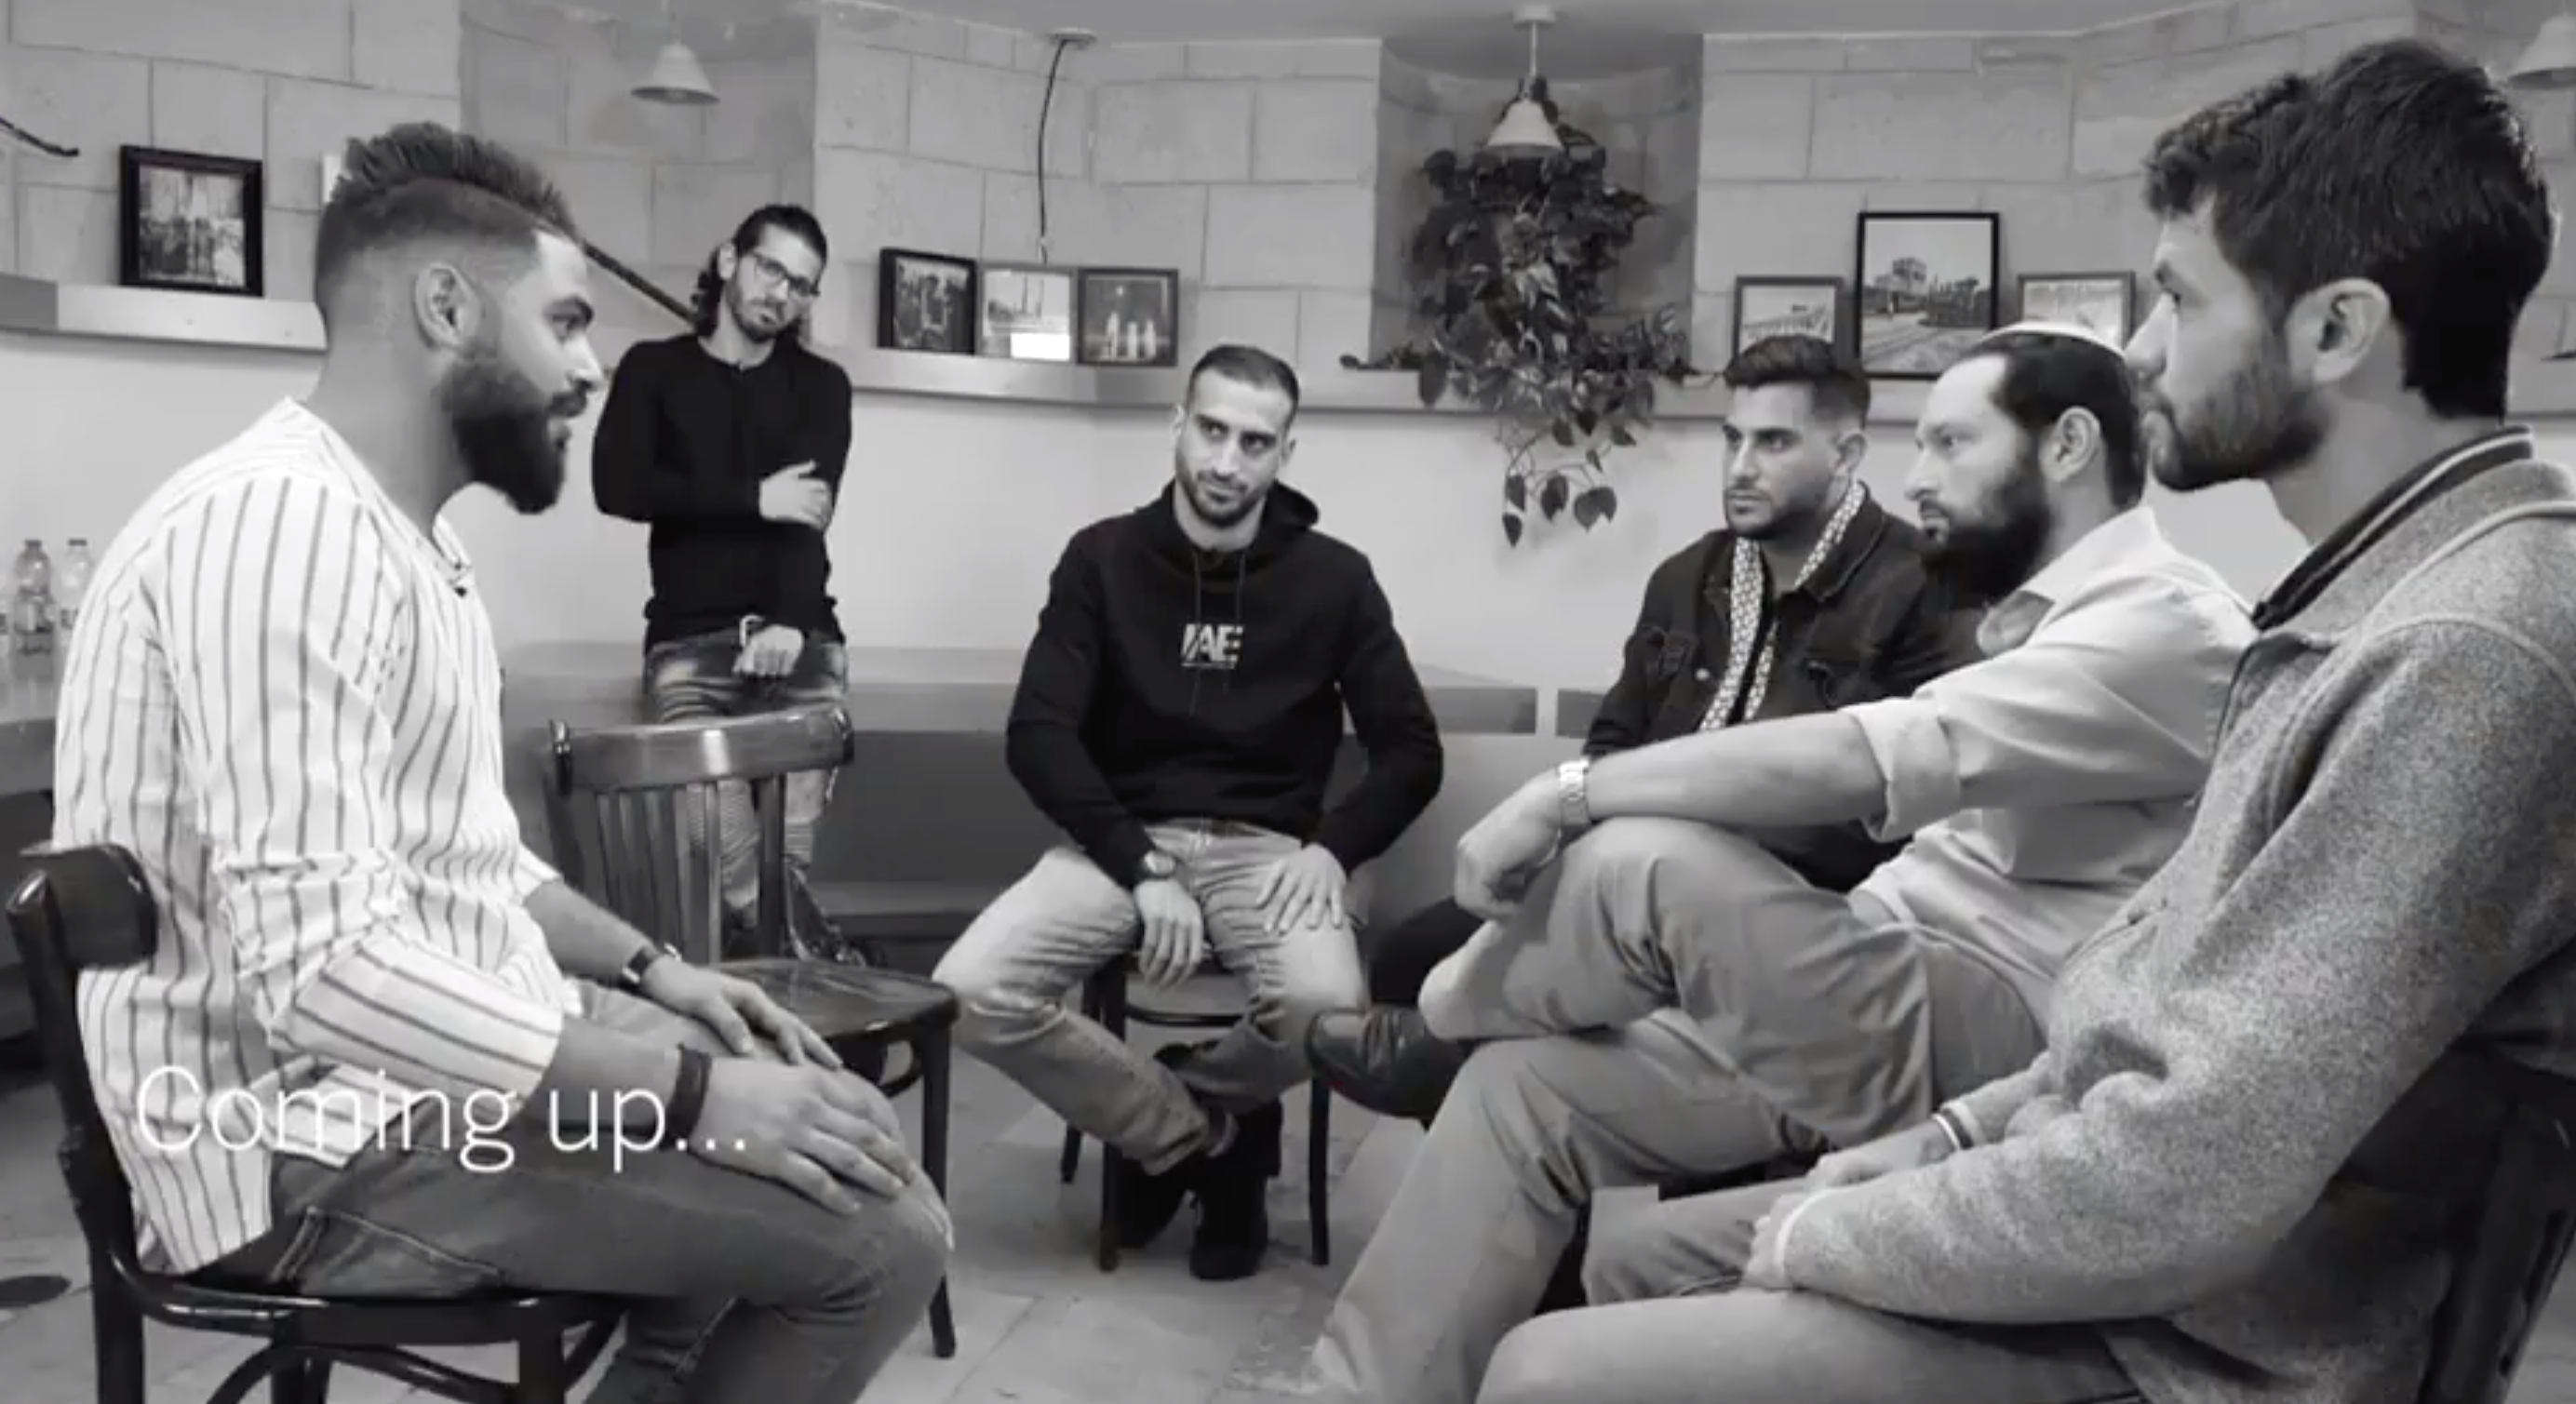 Palestinians & Israelis listen to each other